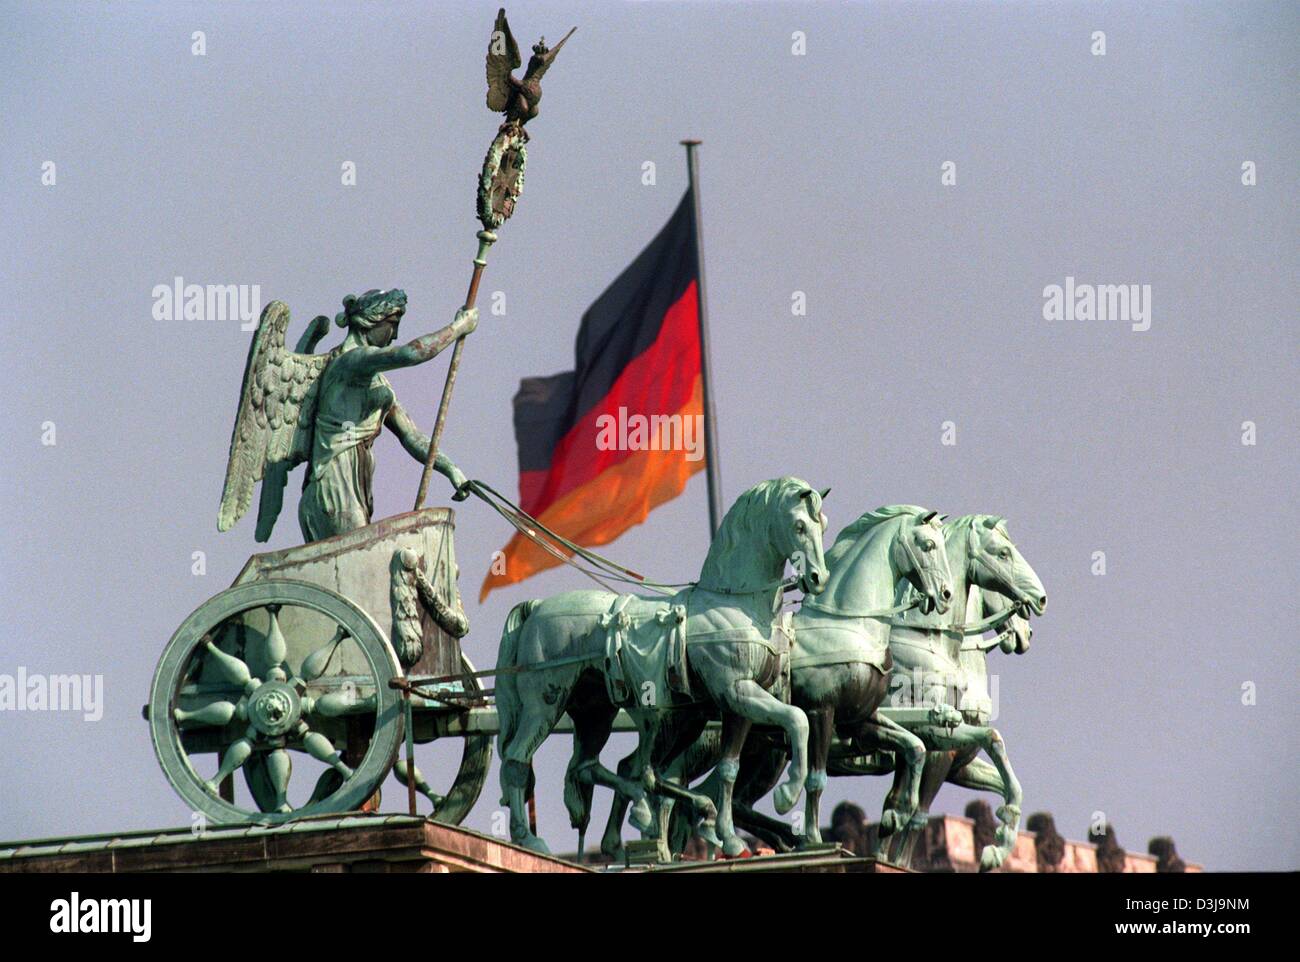 dpa files) - The restored statue of Nike, the goddess of victory, steers a  chariot with four hourses while holding the Prussian symboles, a cross and  eagle in her hand, with the